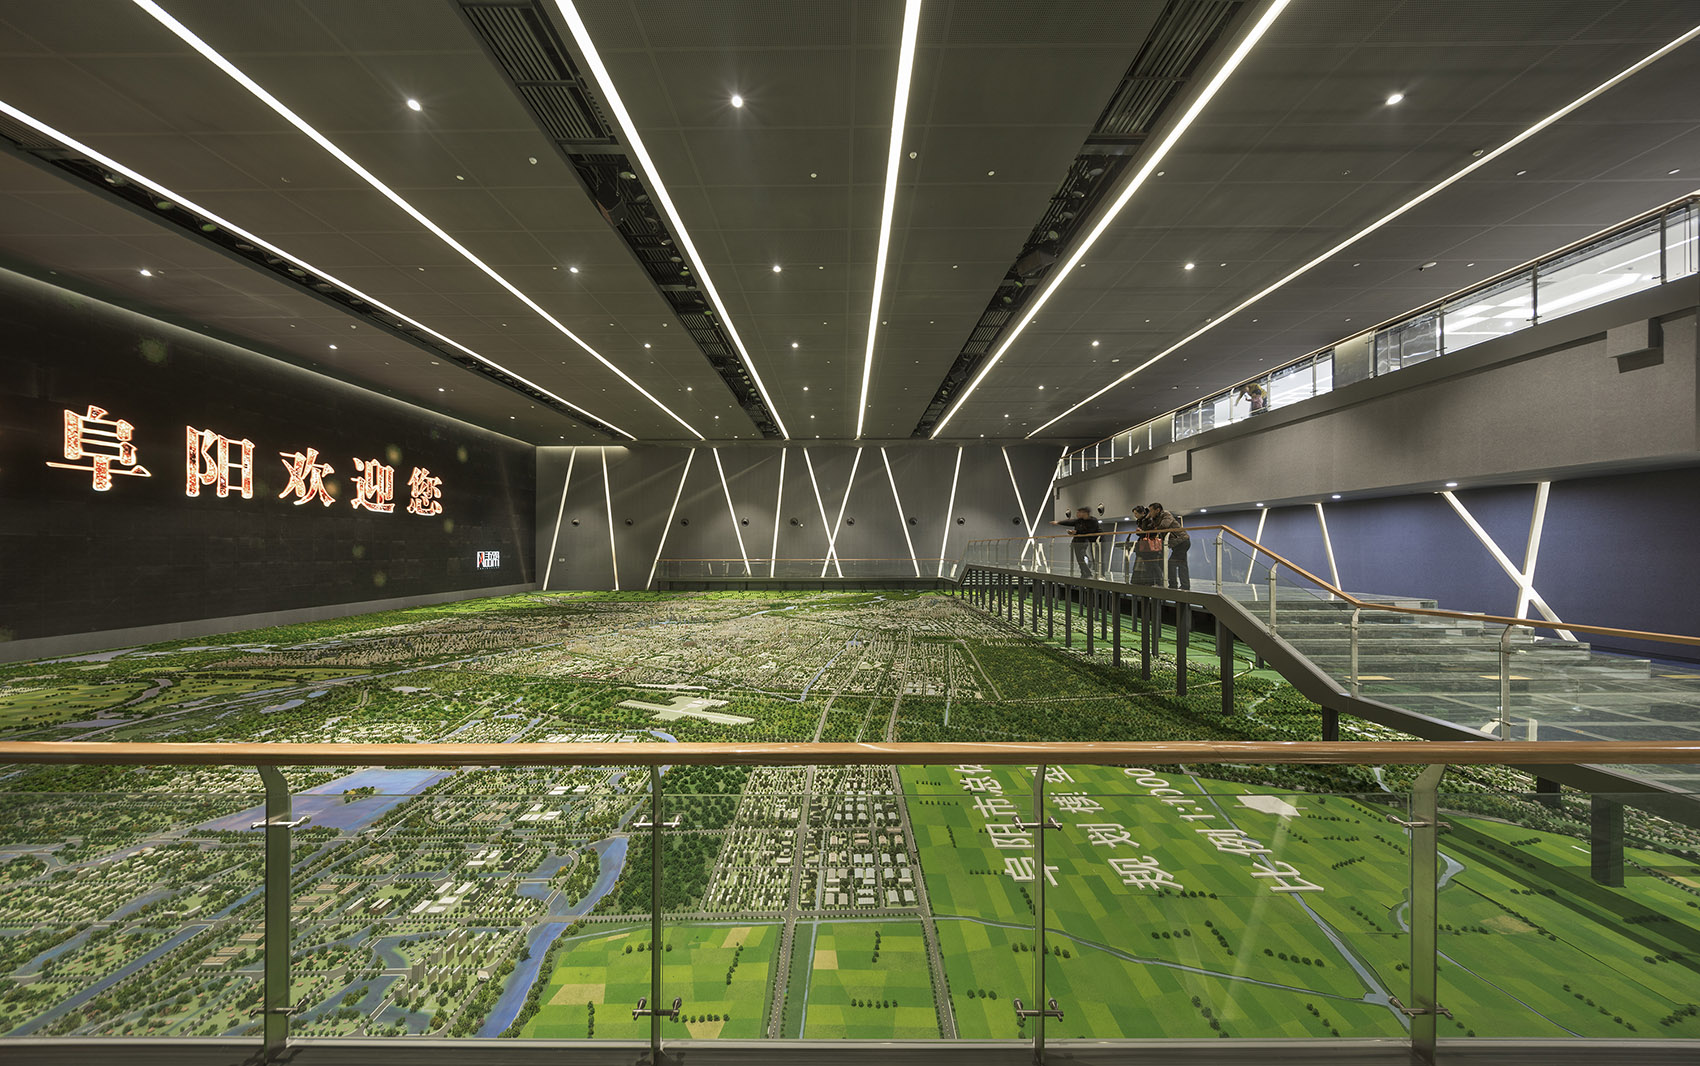 35-Fuyang-Planning-Exhibition-Hall-Anhui-by-Architecture-Engineers-Co-LTD-of-Sou.jpg